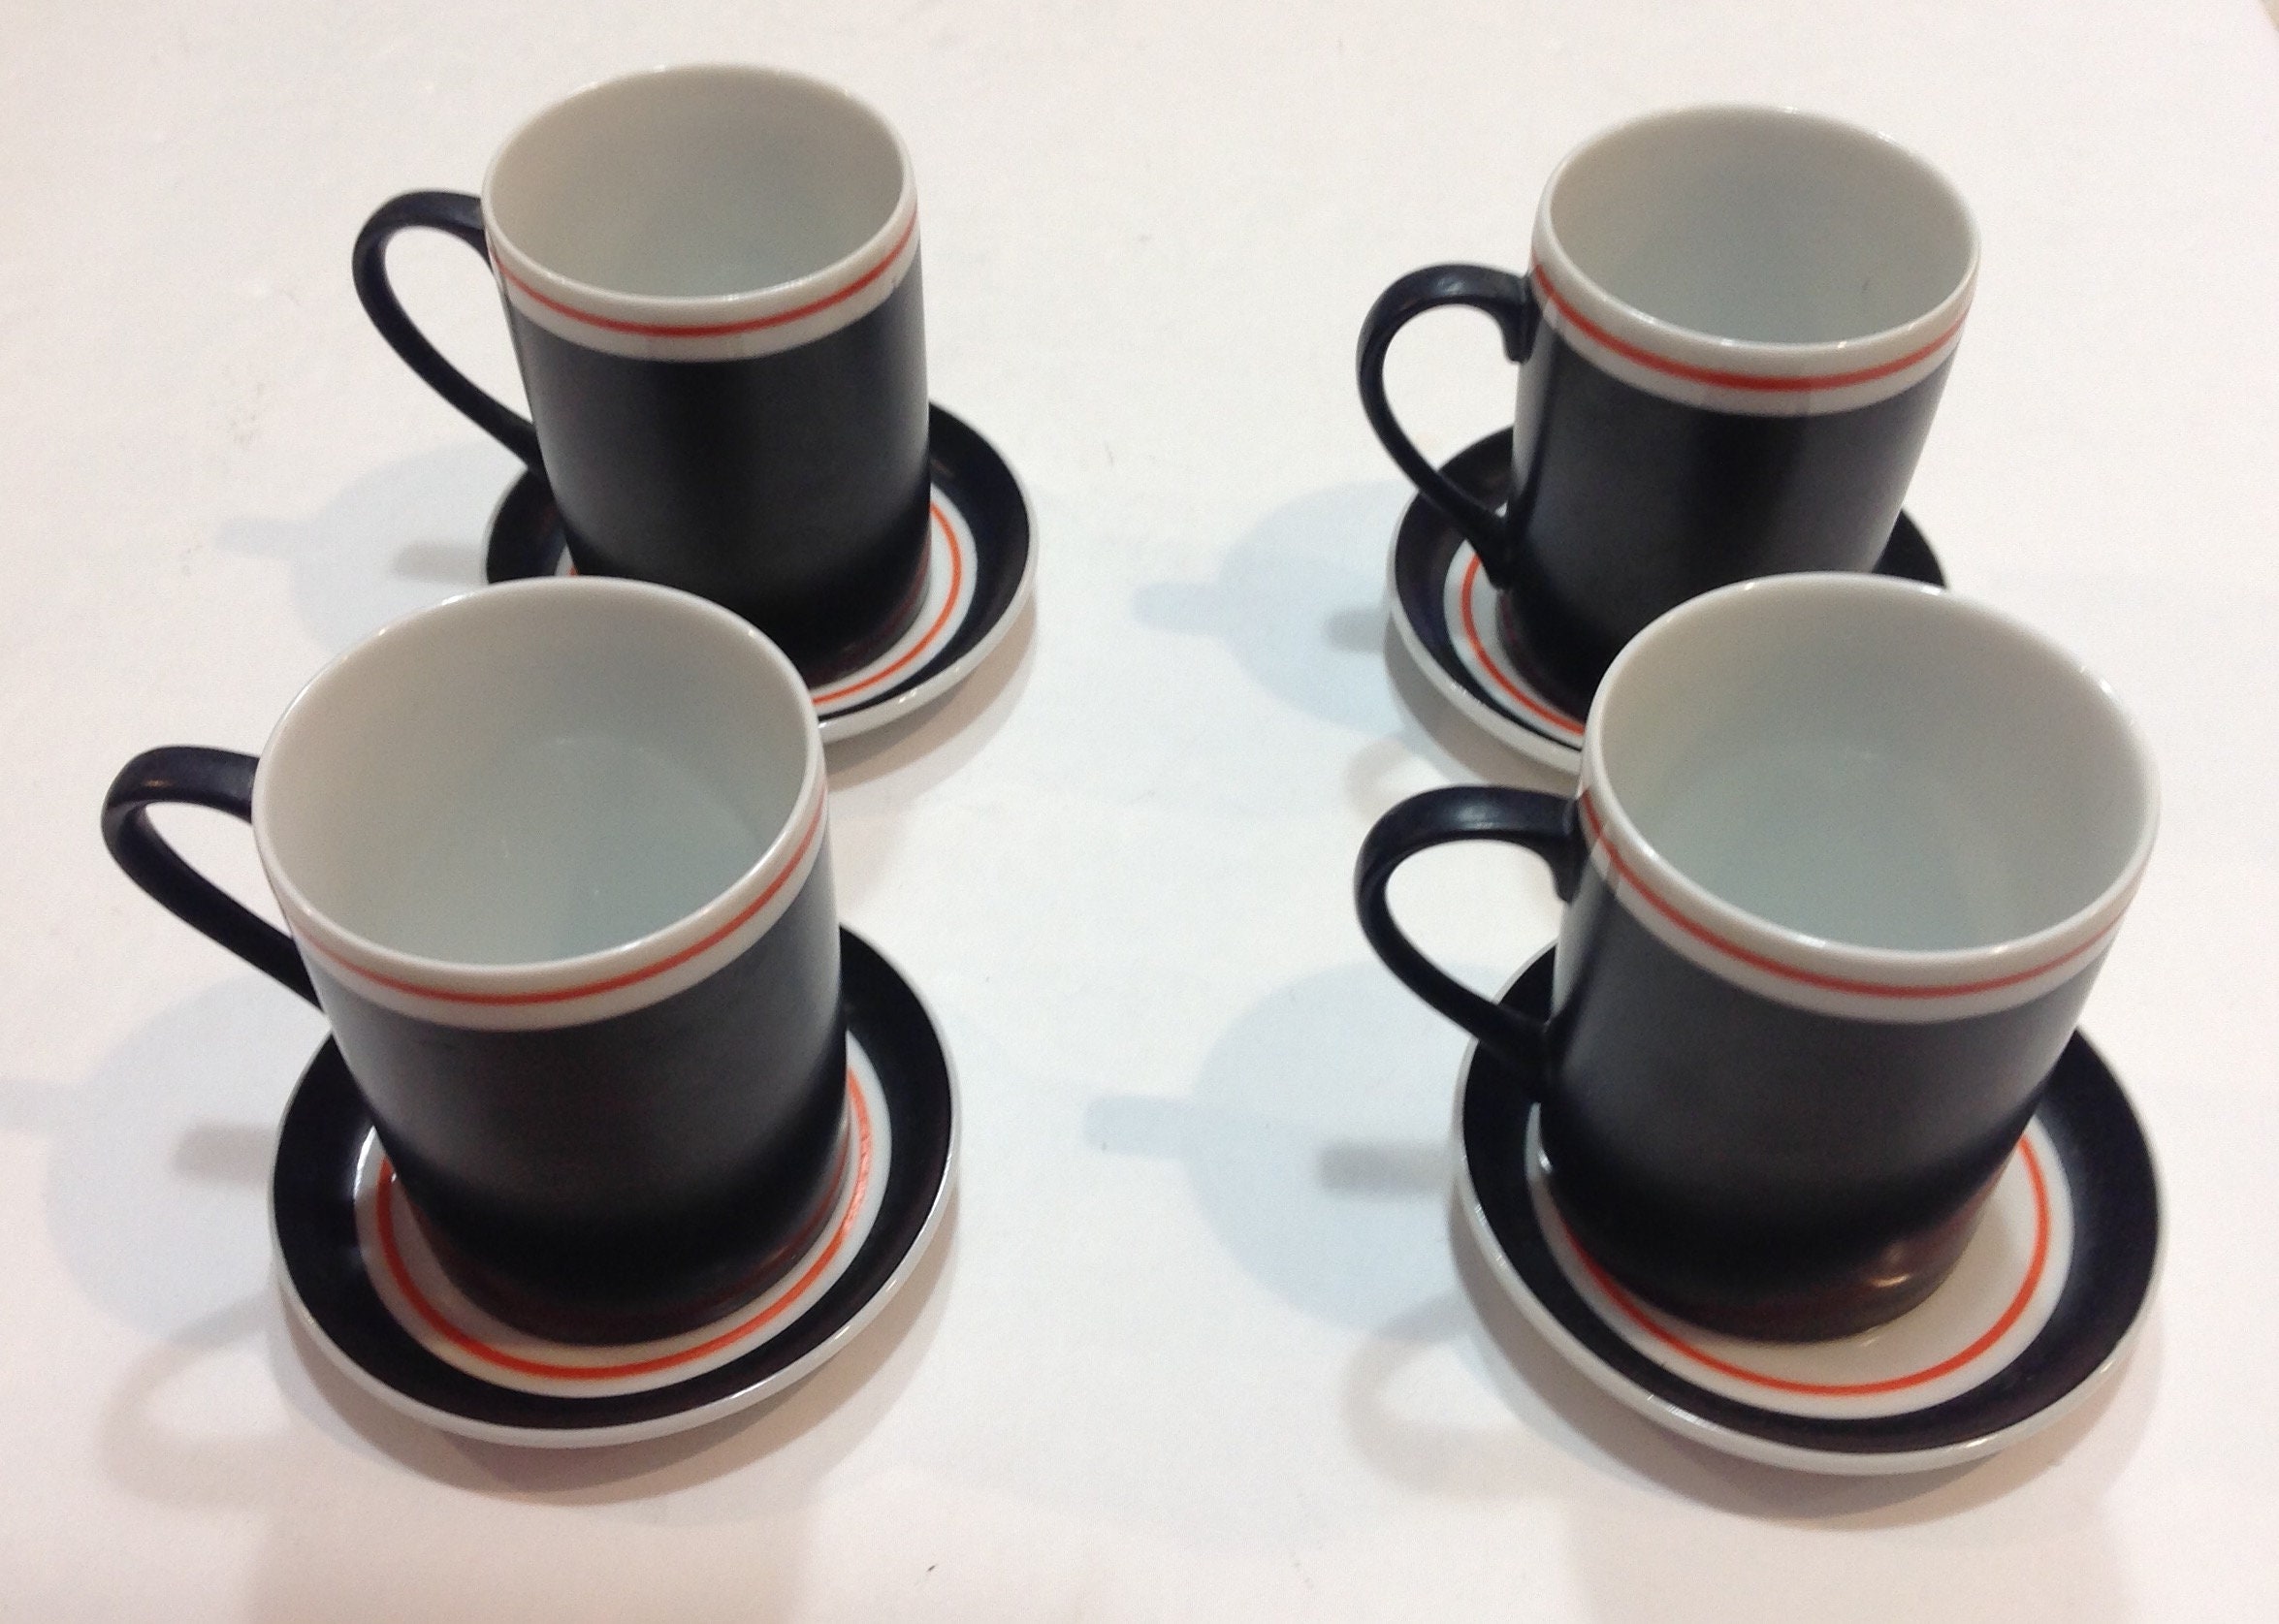 Schmid Porcelain Set of Four Demitasse Cups and Saucers Made in Japan 